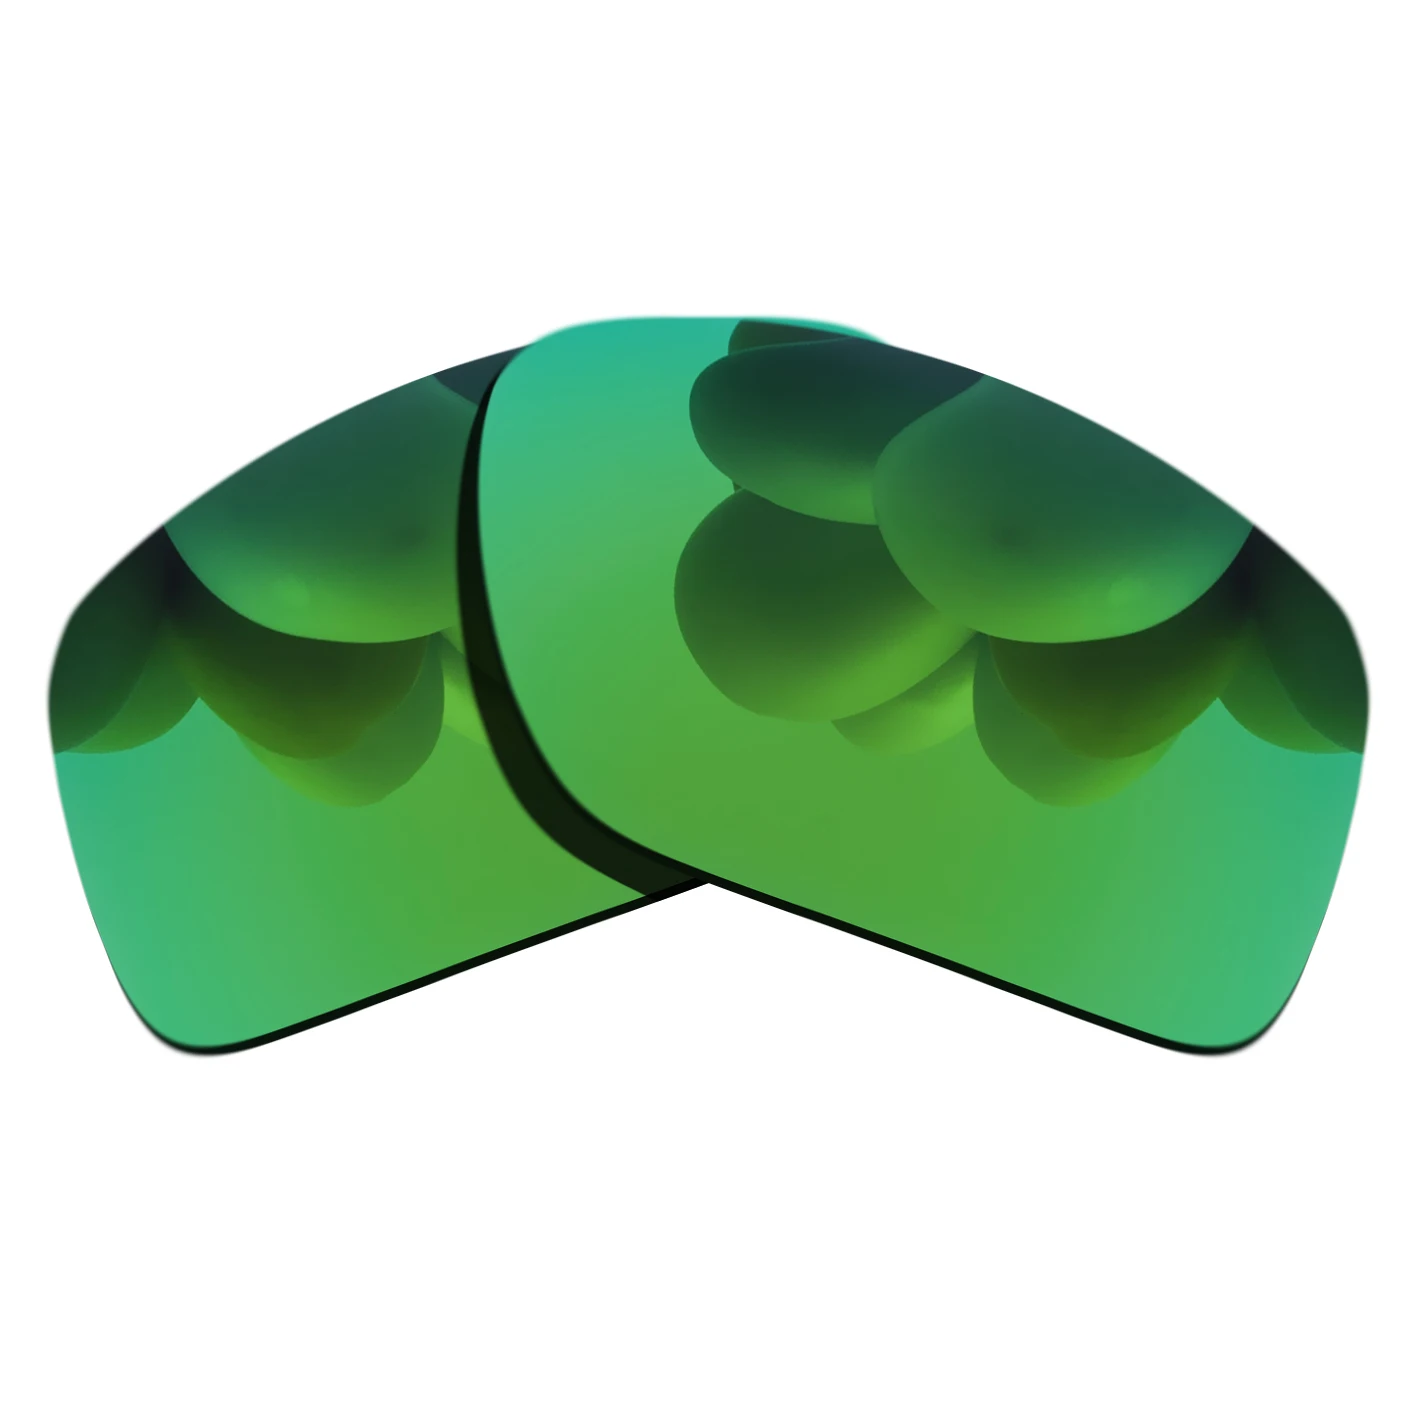 

100% Precisely Cut Polarized Replacement Lenses for Split Shot Sunglasses Green Mirrored Coating Color- Choices